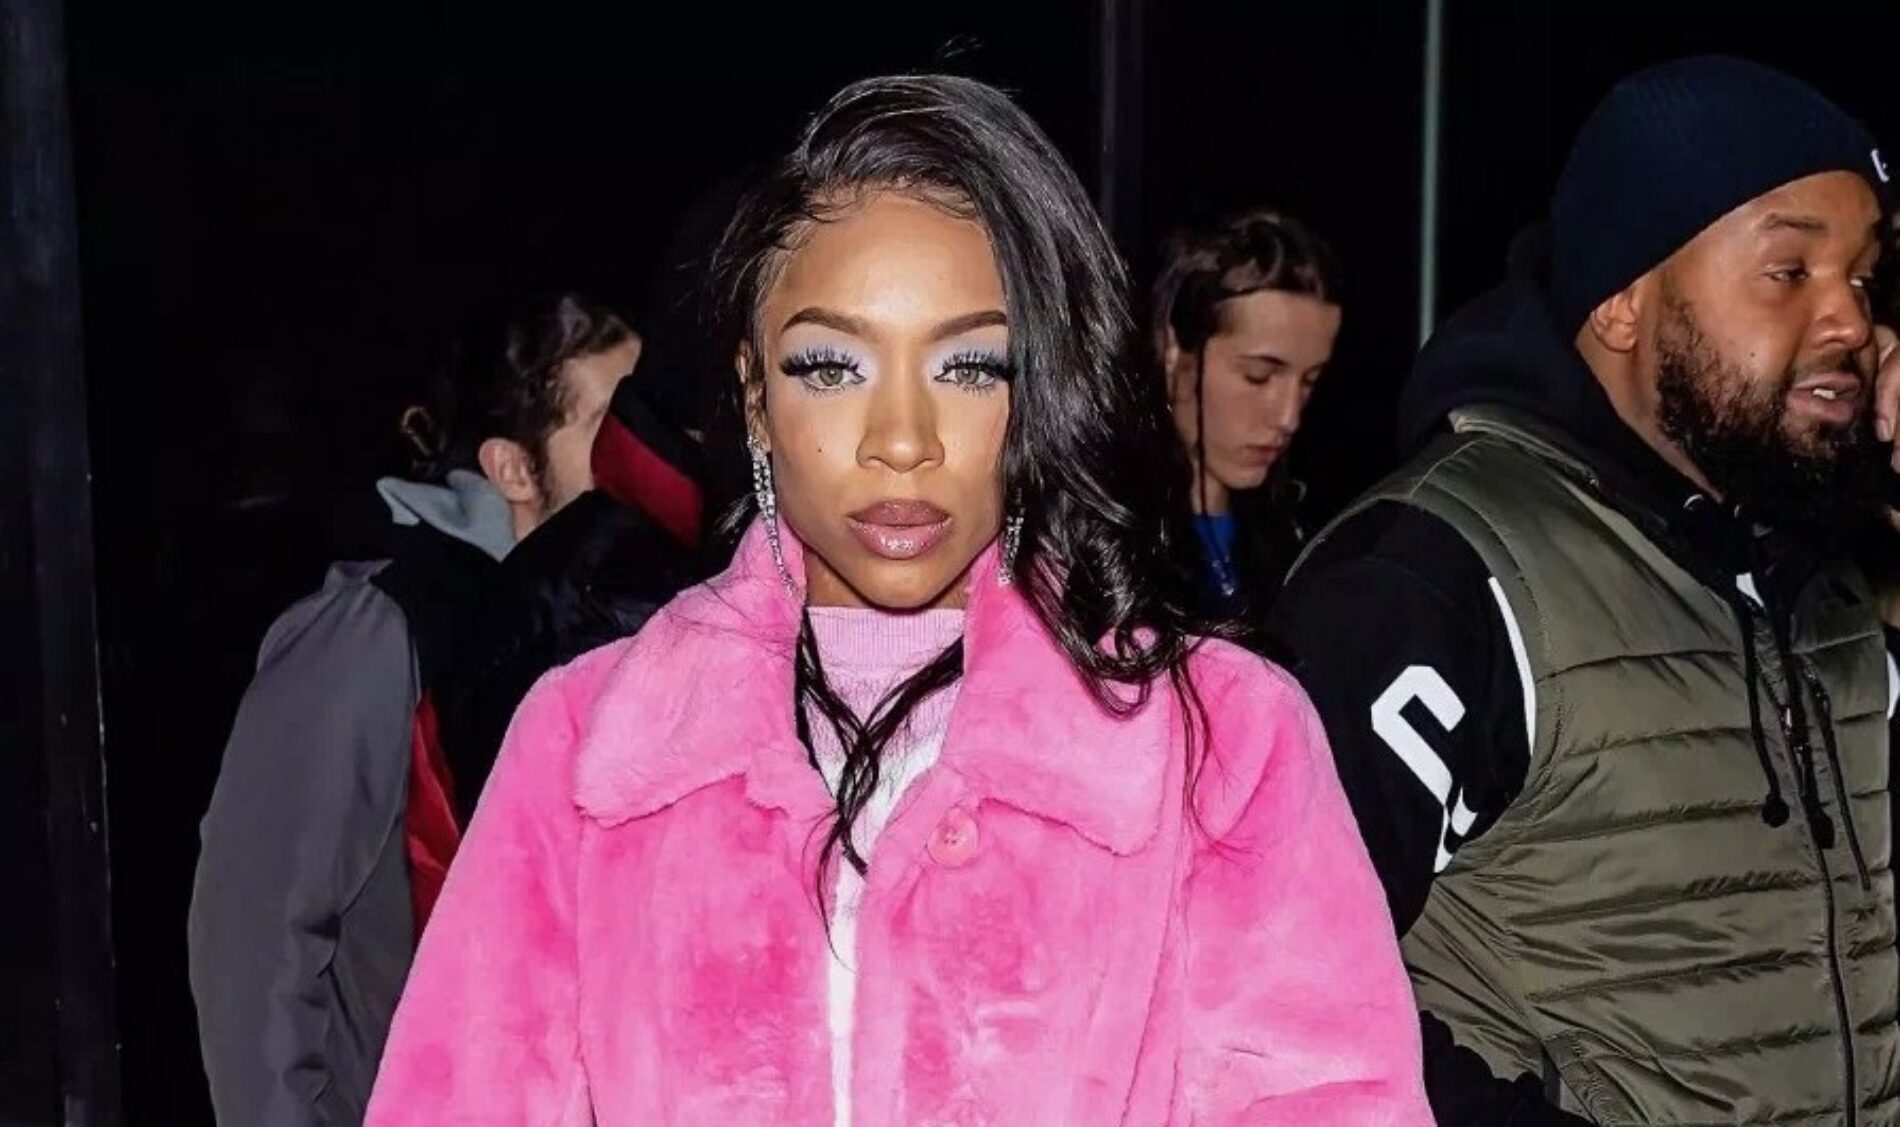 Lil Mama Says She’s Starting a “Heterosexual Rights Movement” Following Accusations of Transphobia